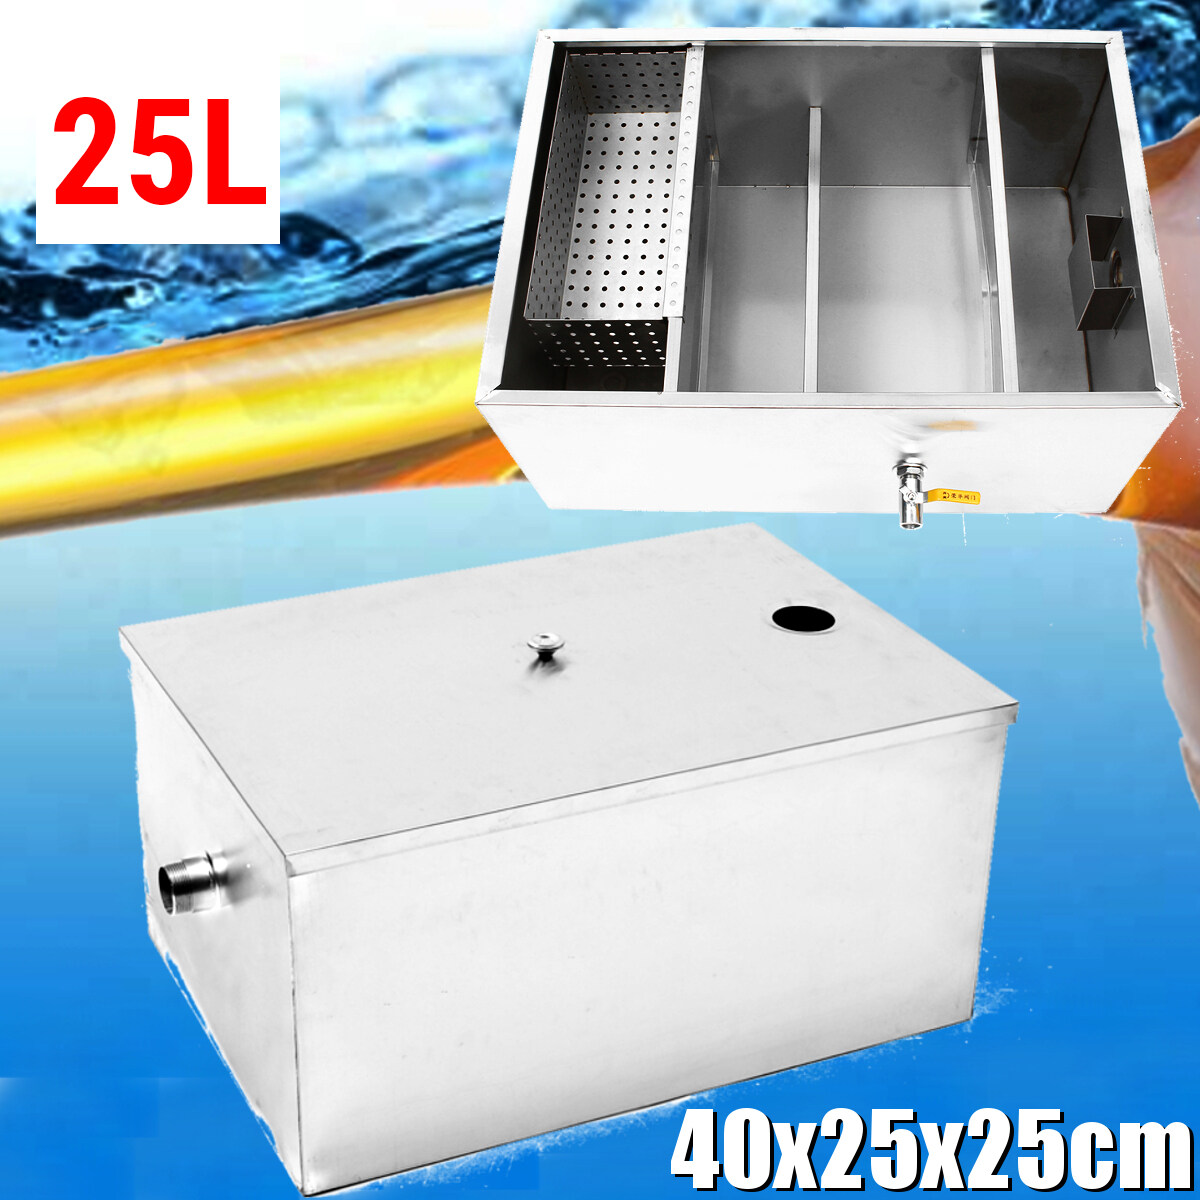 m3/h Stainless Steel Grease Trap Interceptor 500 Fit Kitchen Wastewater 25L 